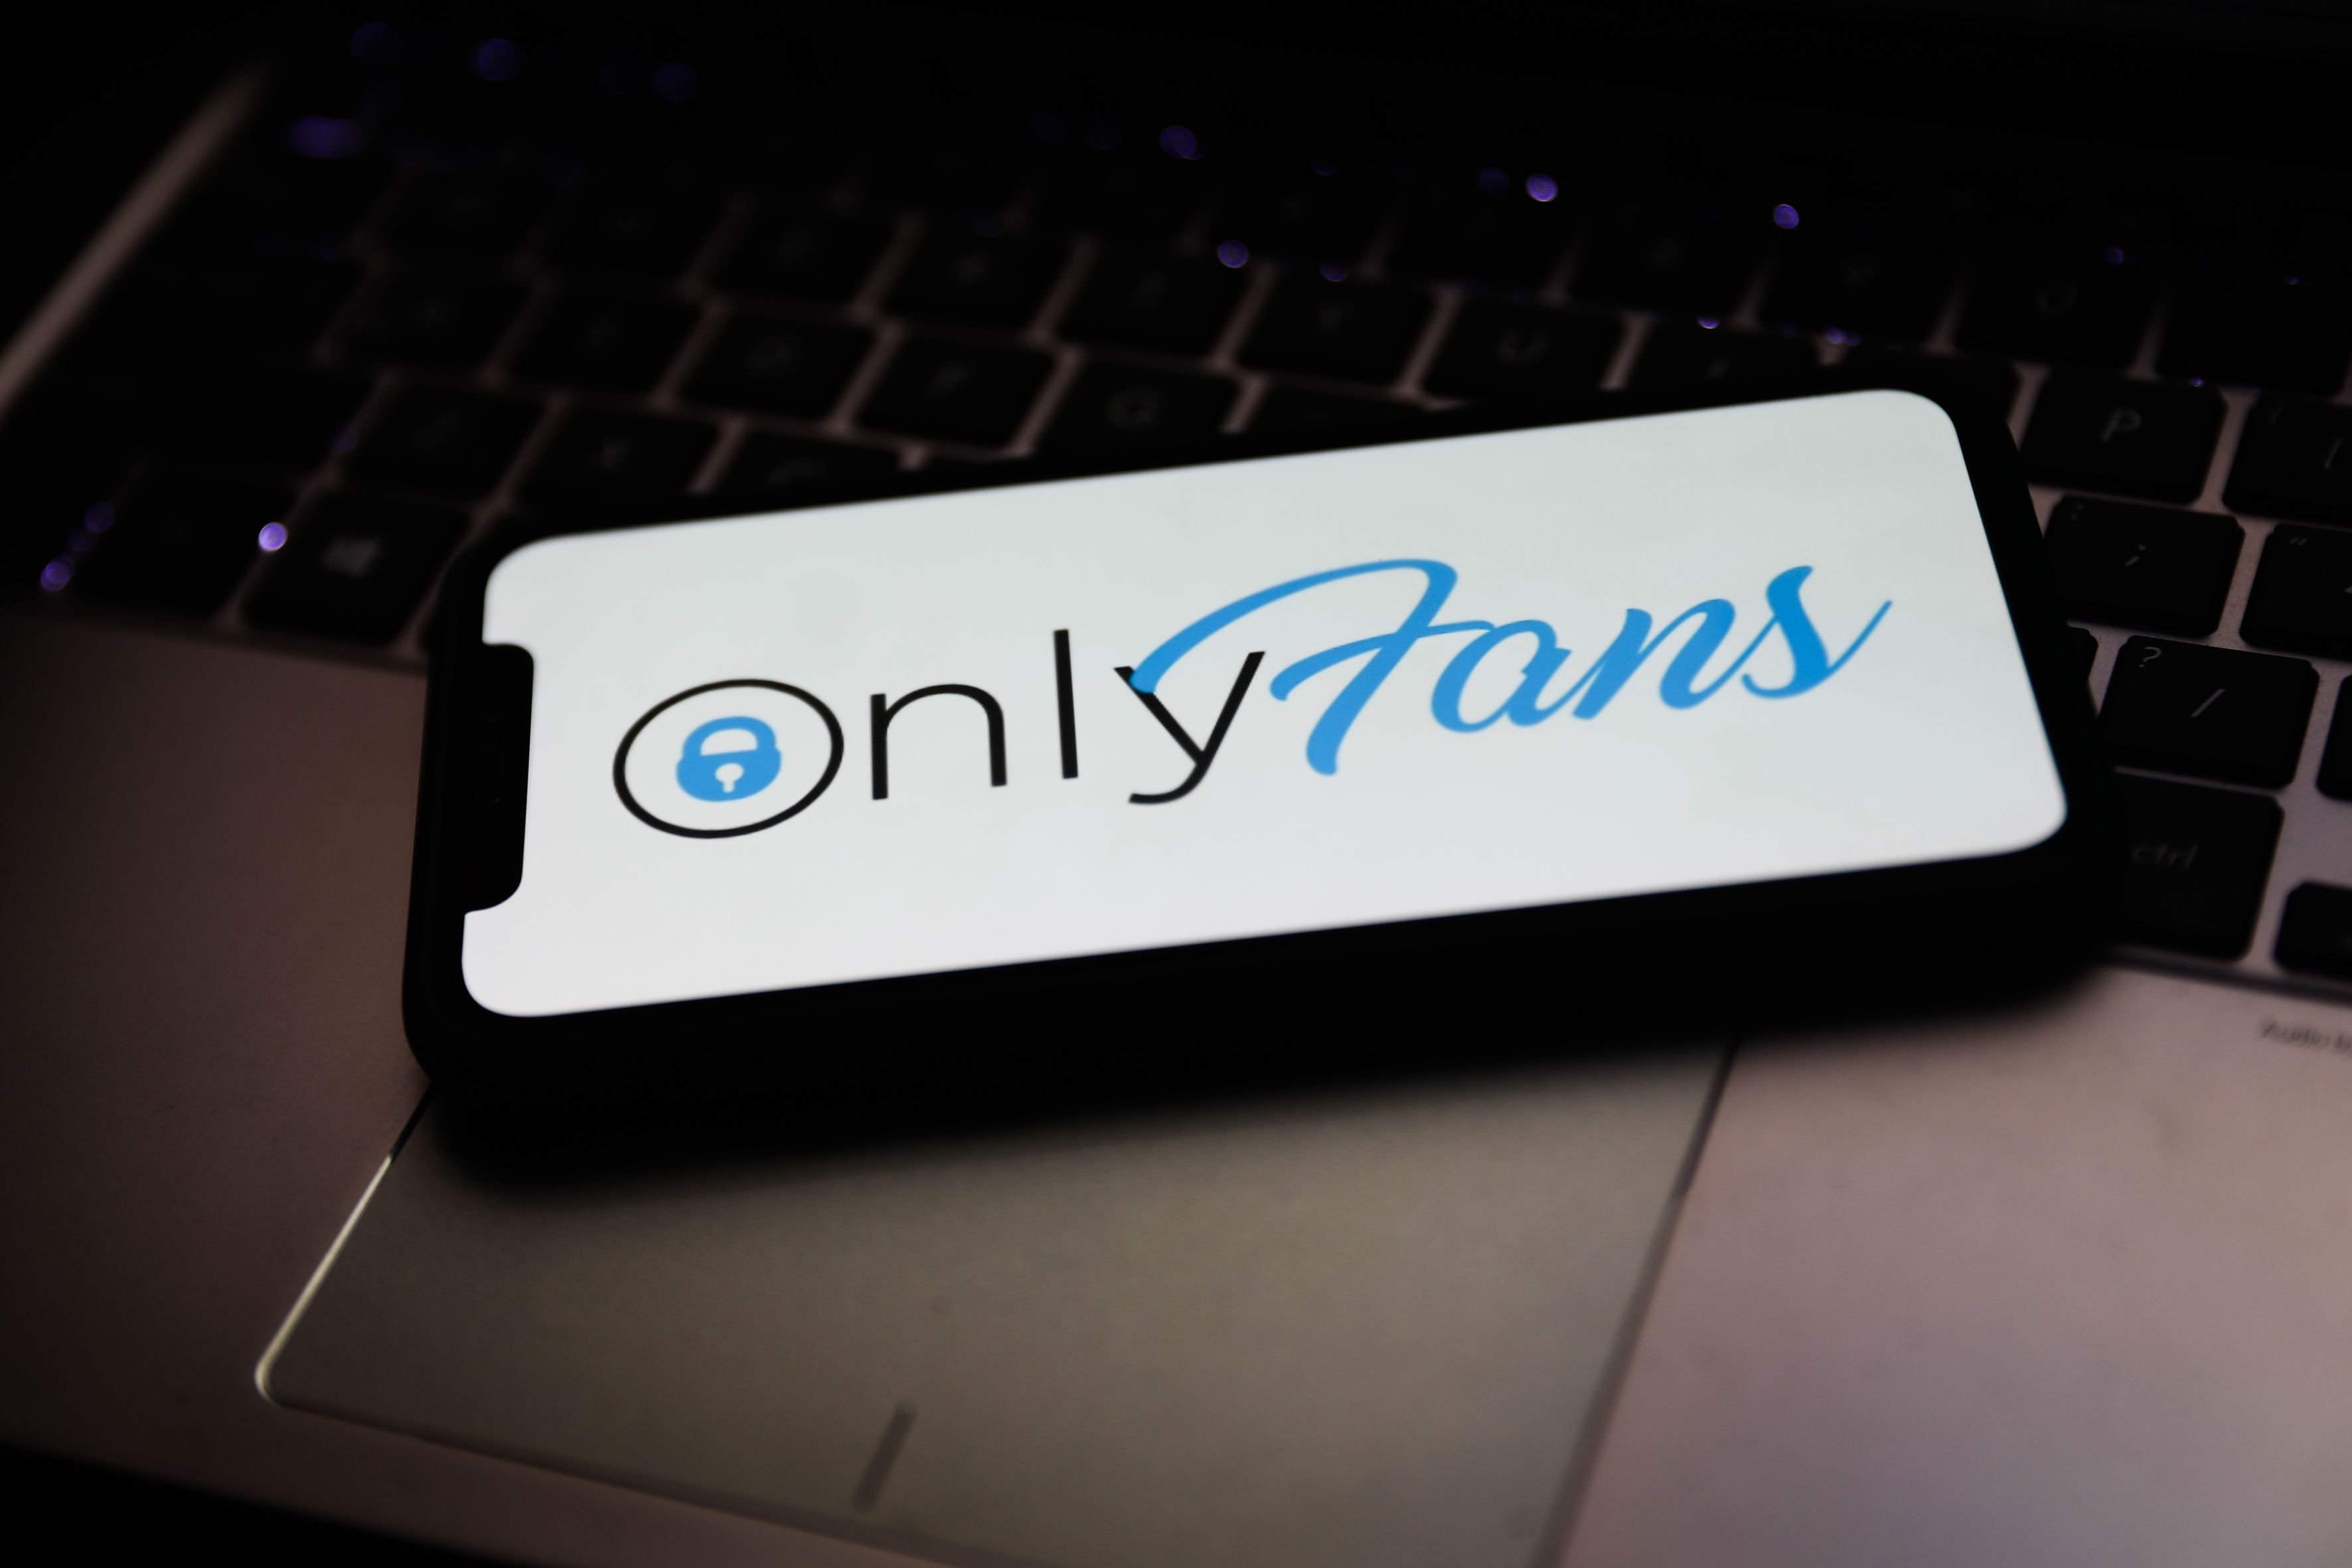 Dispute onlyfans charge